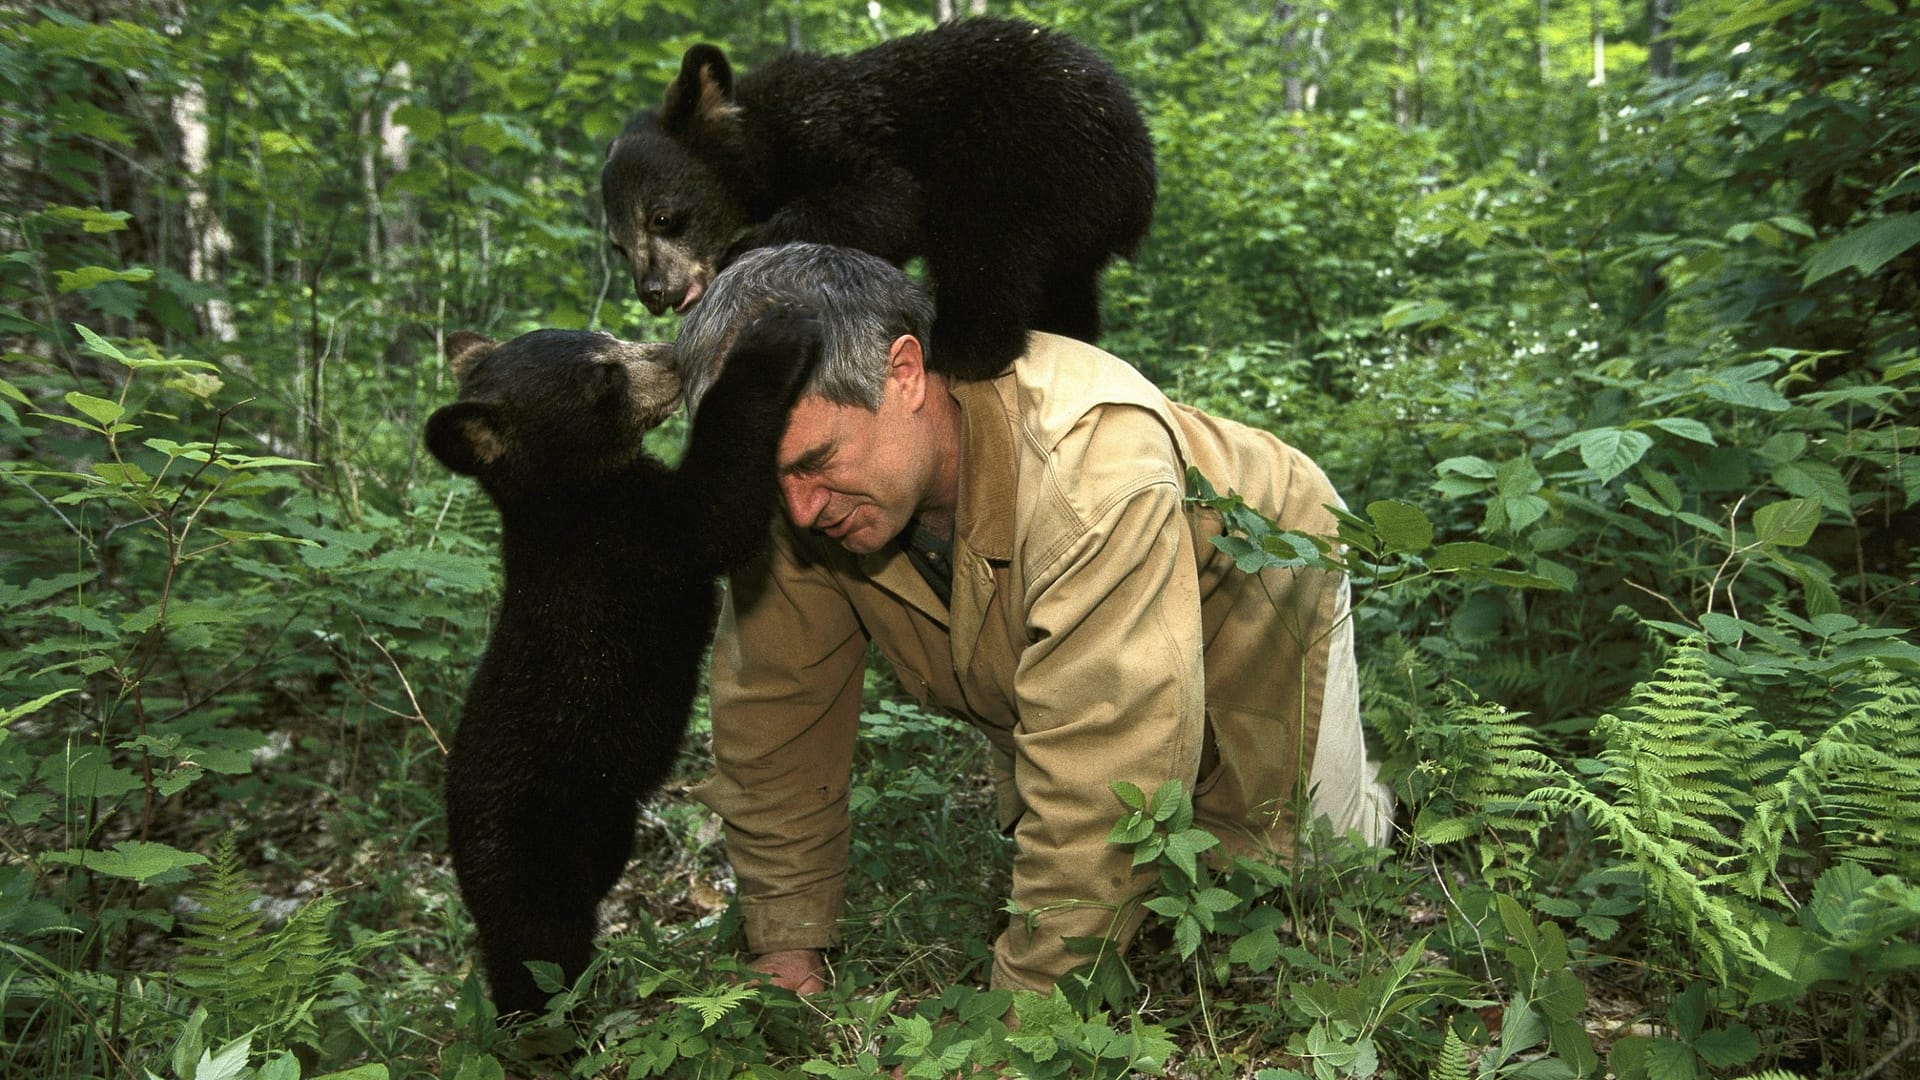 Image: Ben on the ground with two black bears (cubs) playing on top of him